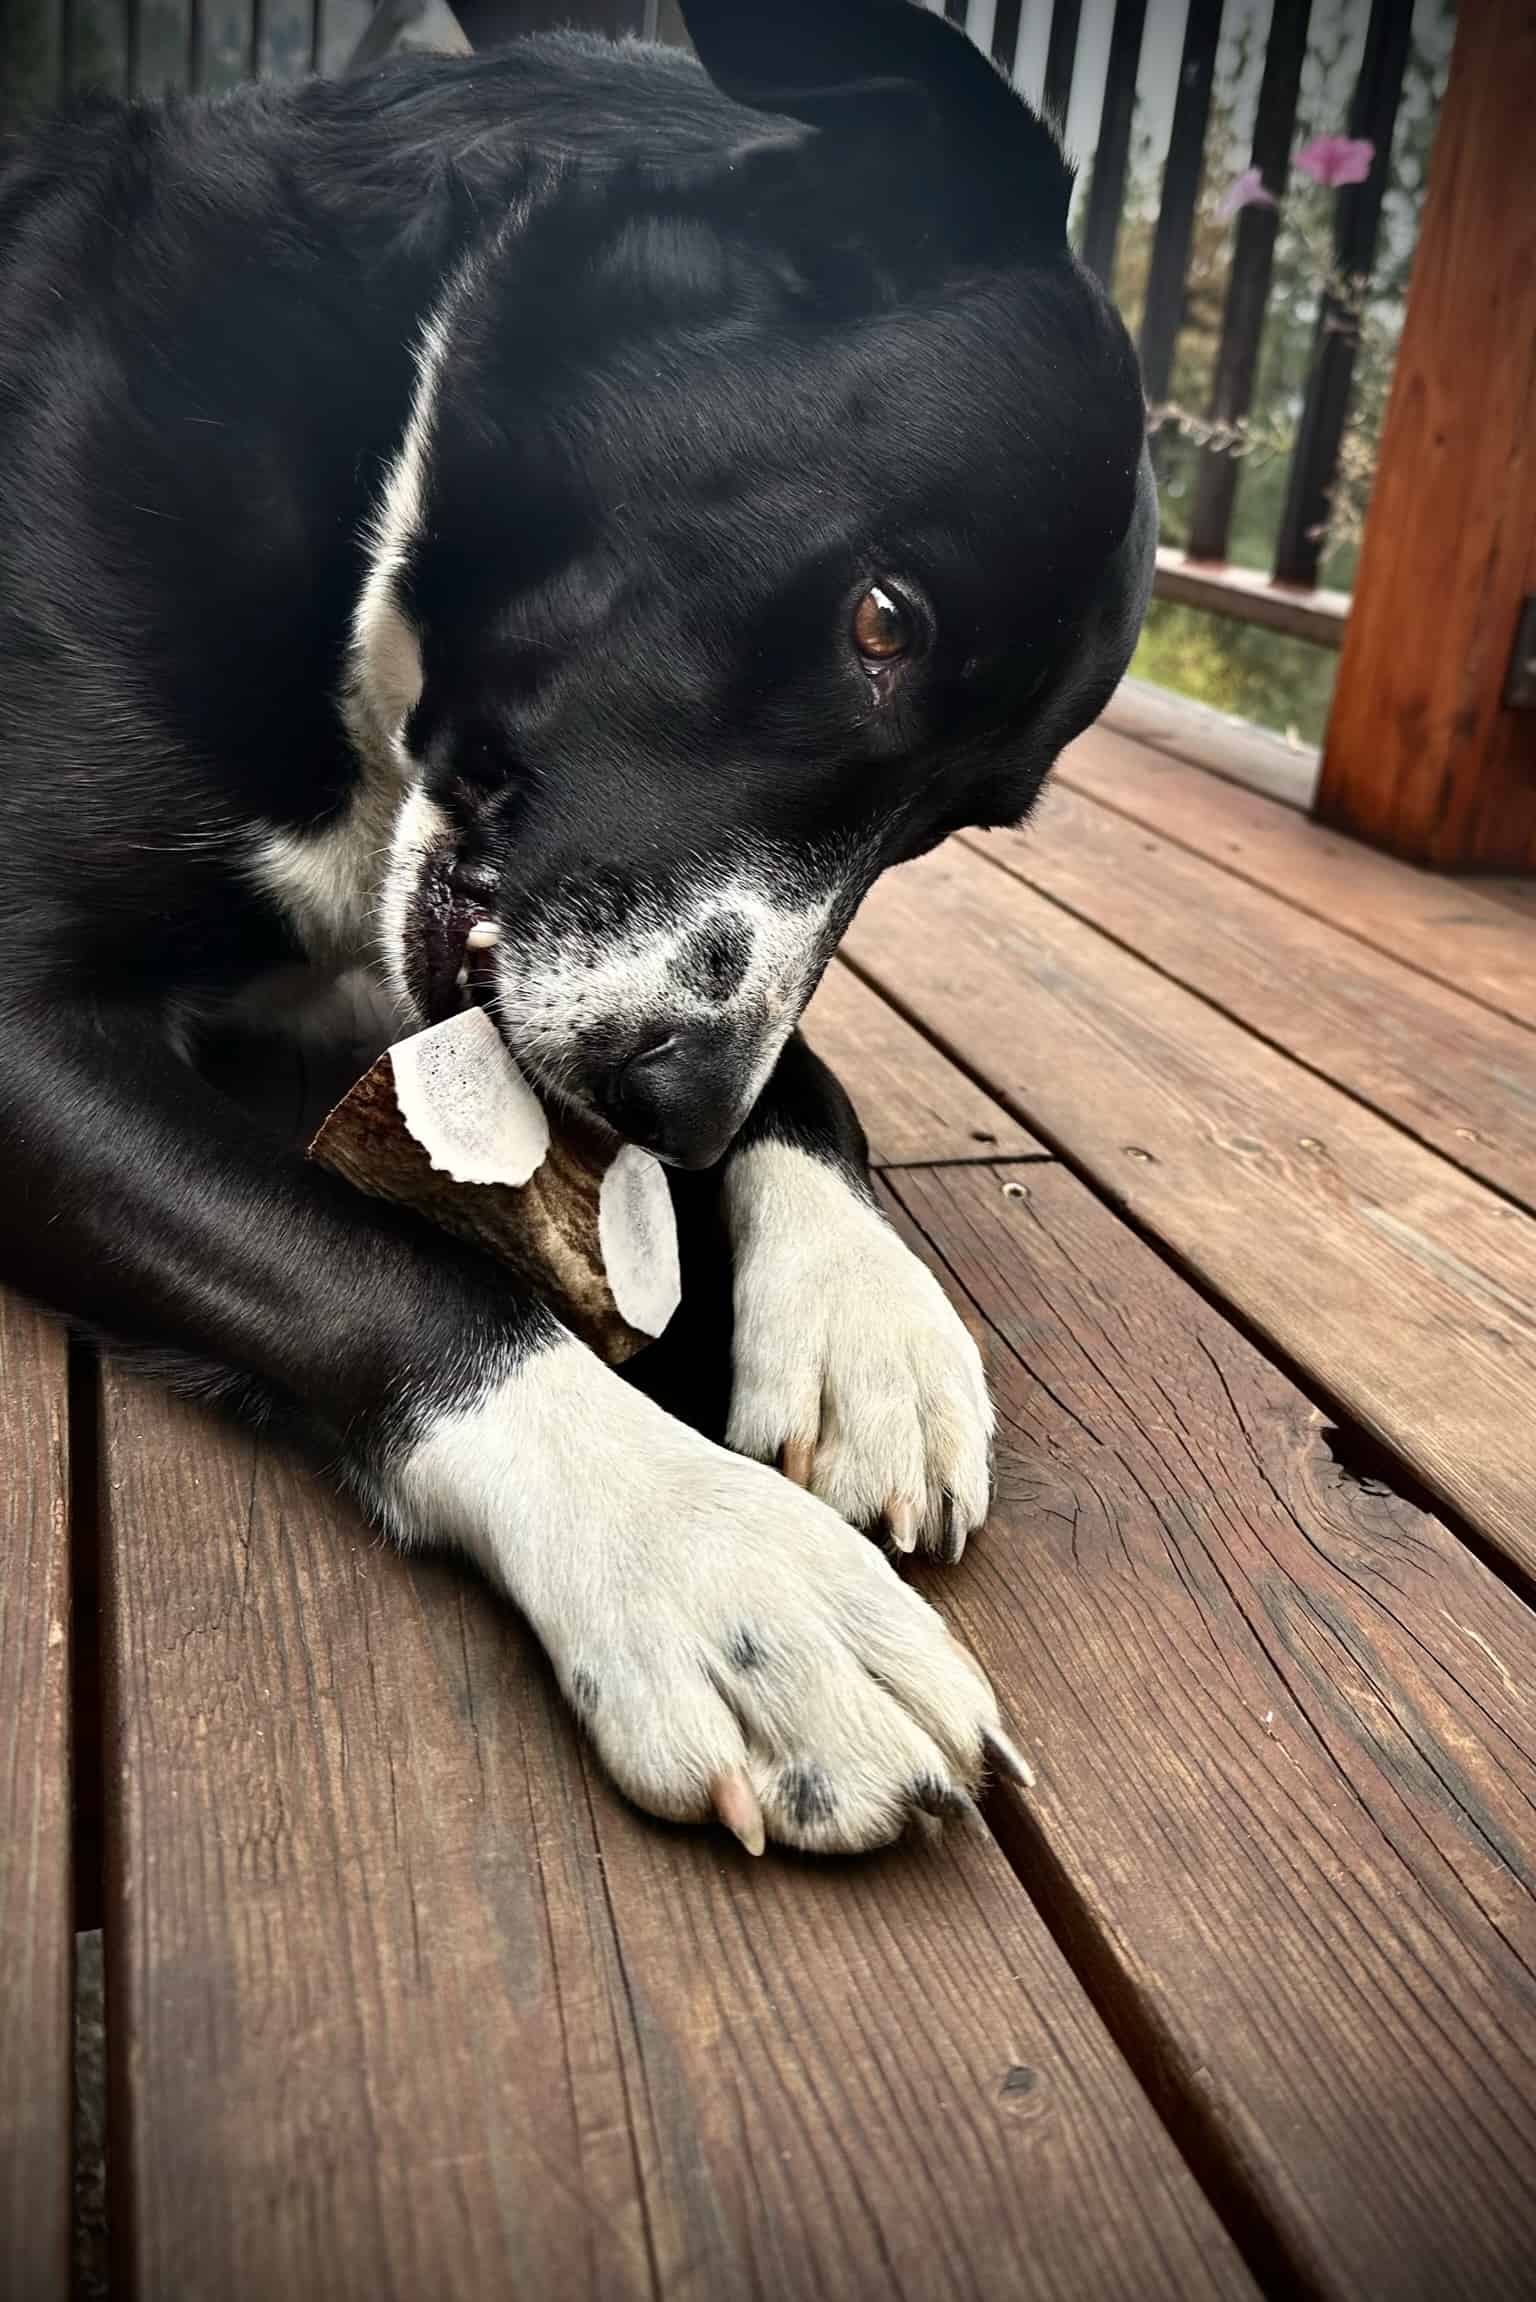 Unique Antler Design offers top grade antler dog chews. These are a healthy fun treat for your four legged friend.